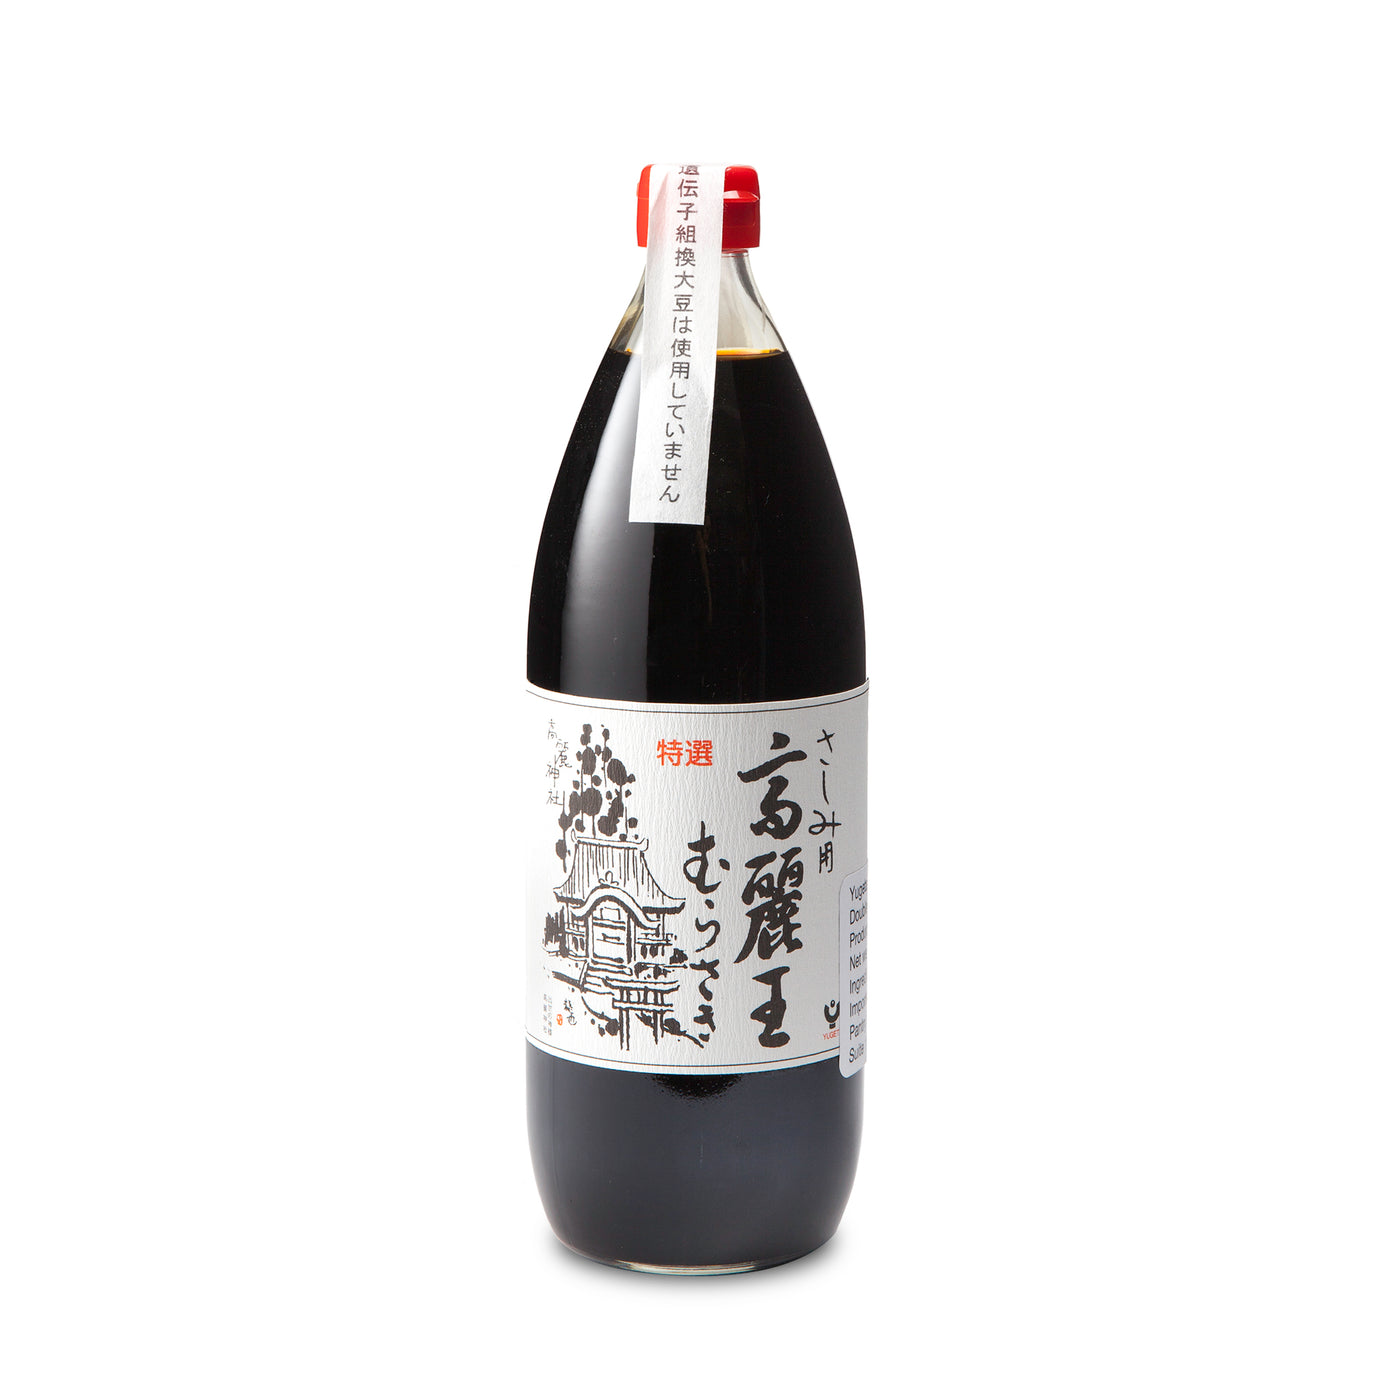 Doubled Brewed Soy Sauce - 1 liter